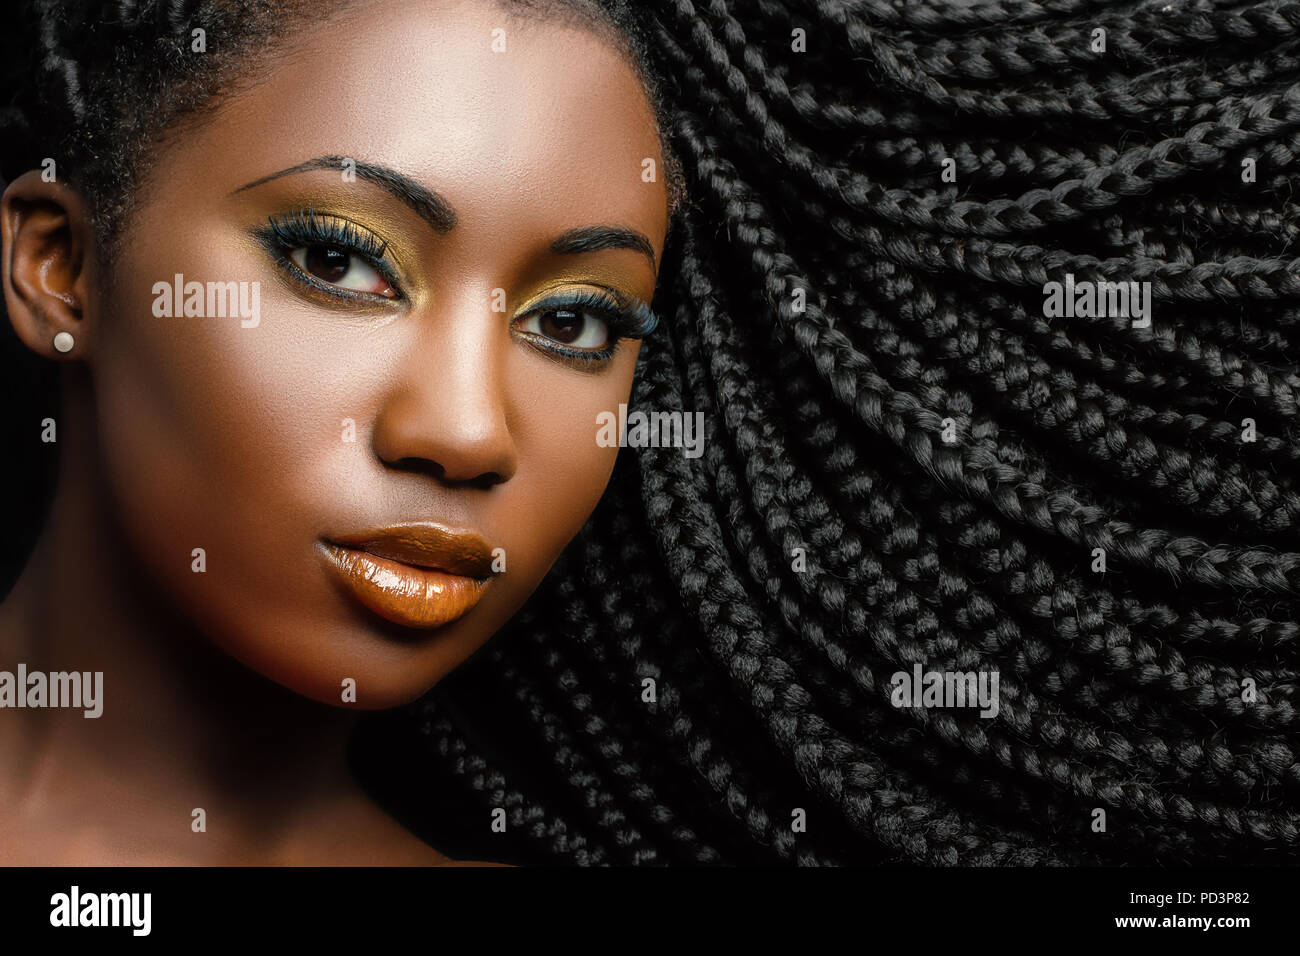 Extreme close up beauty portrait of young african woman showing long braided hair next to face. Stock Photo